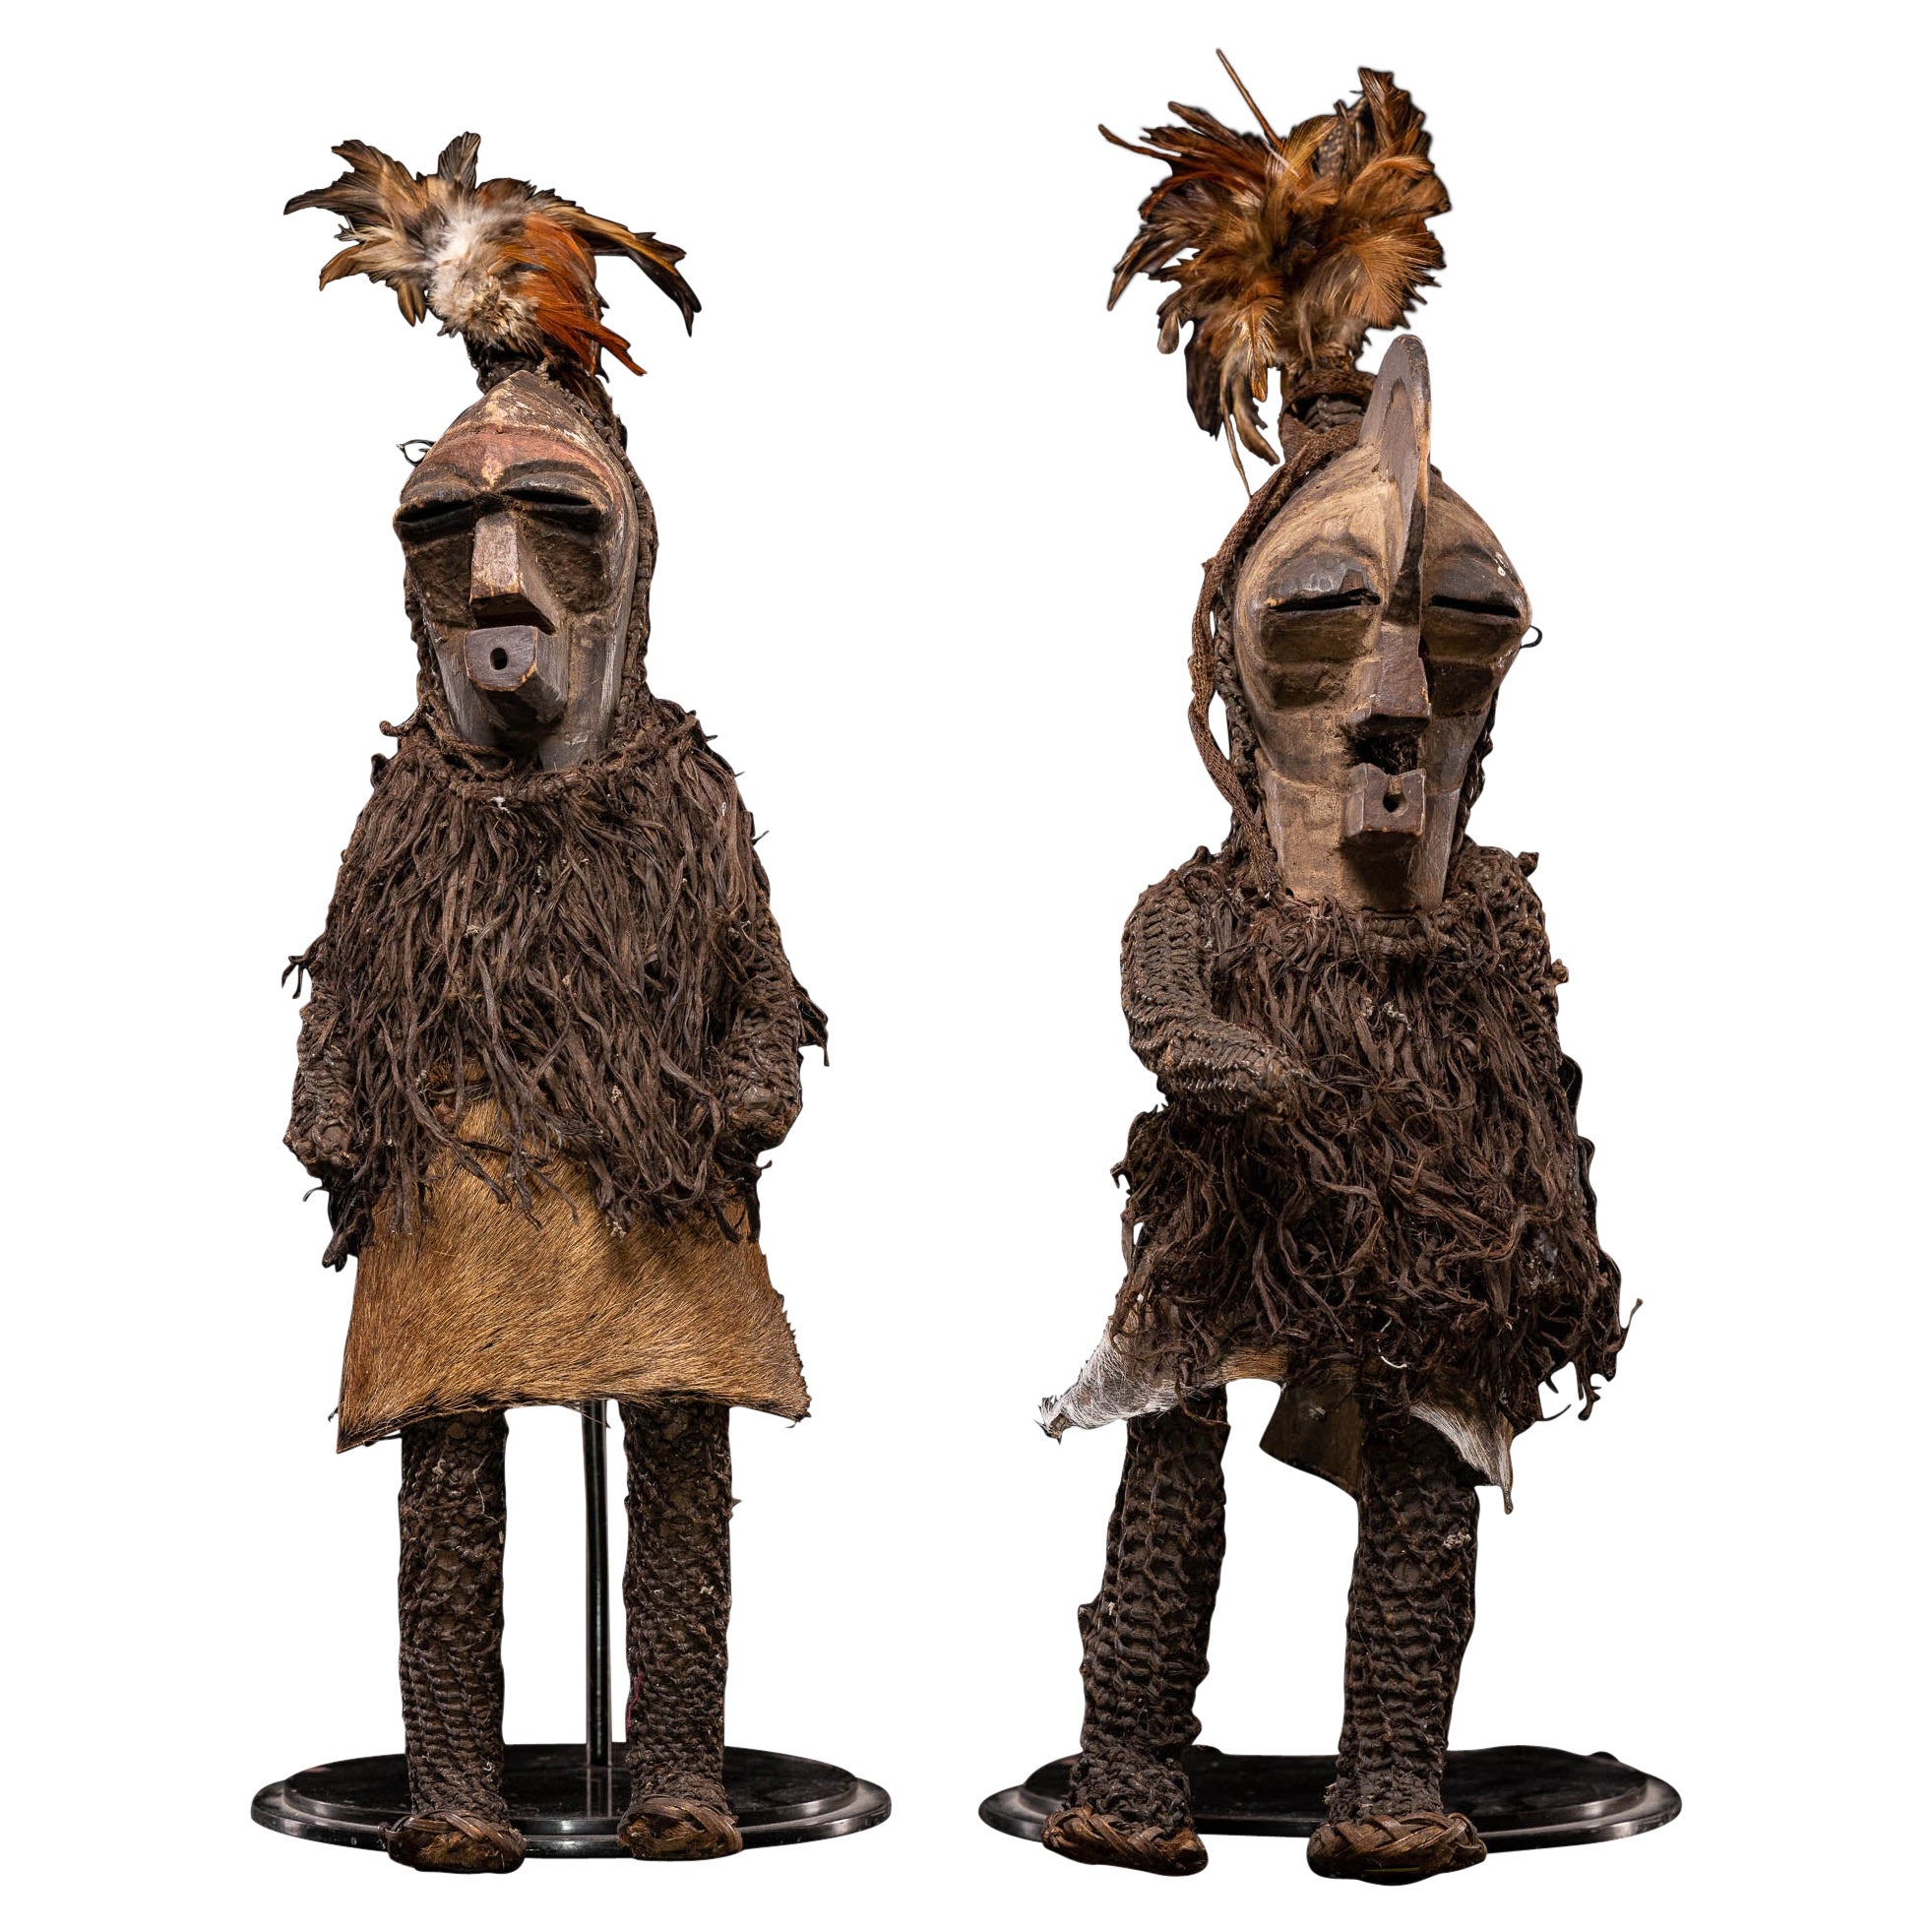 Pair of Didactical dancing Dolls Songye People - DR Congo